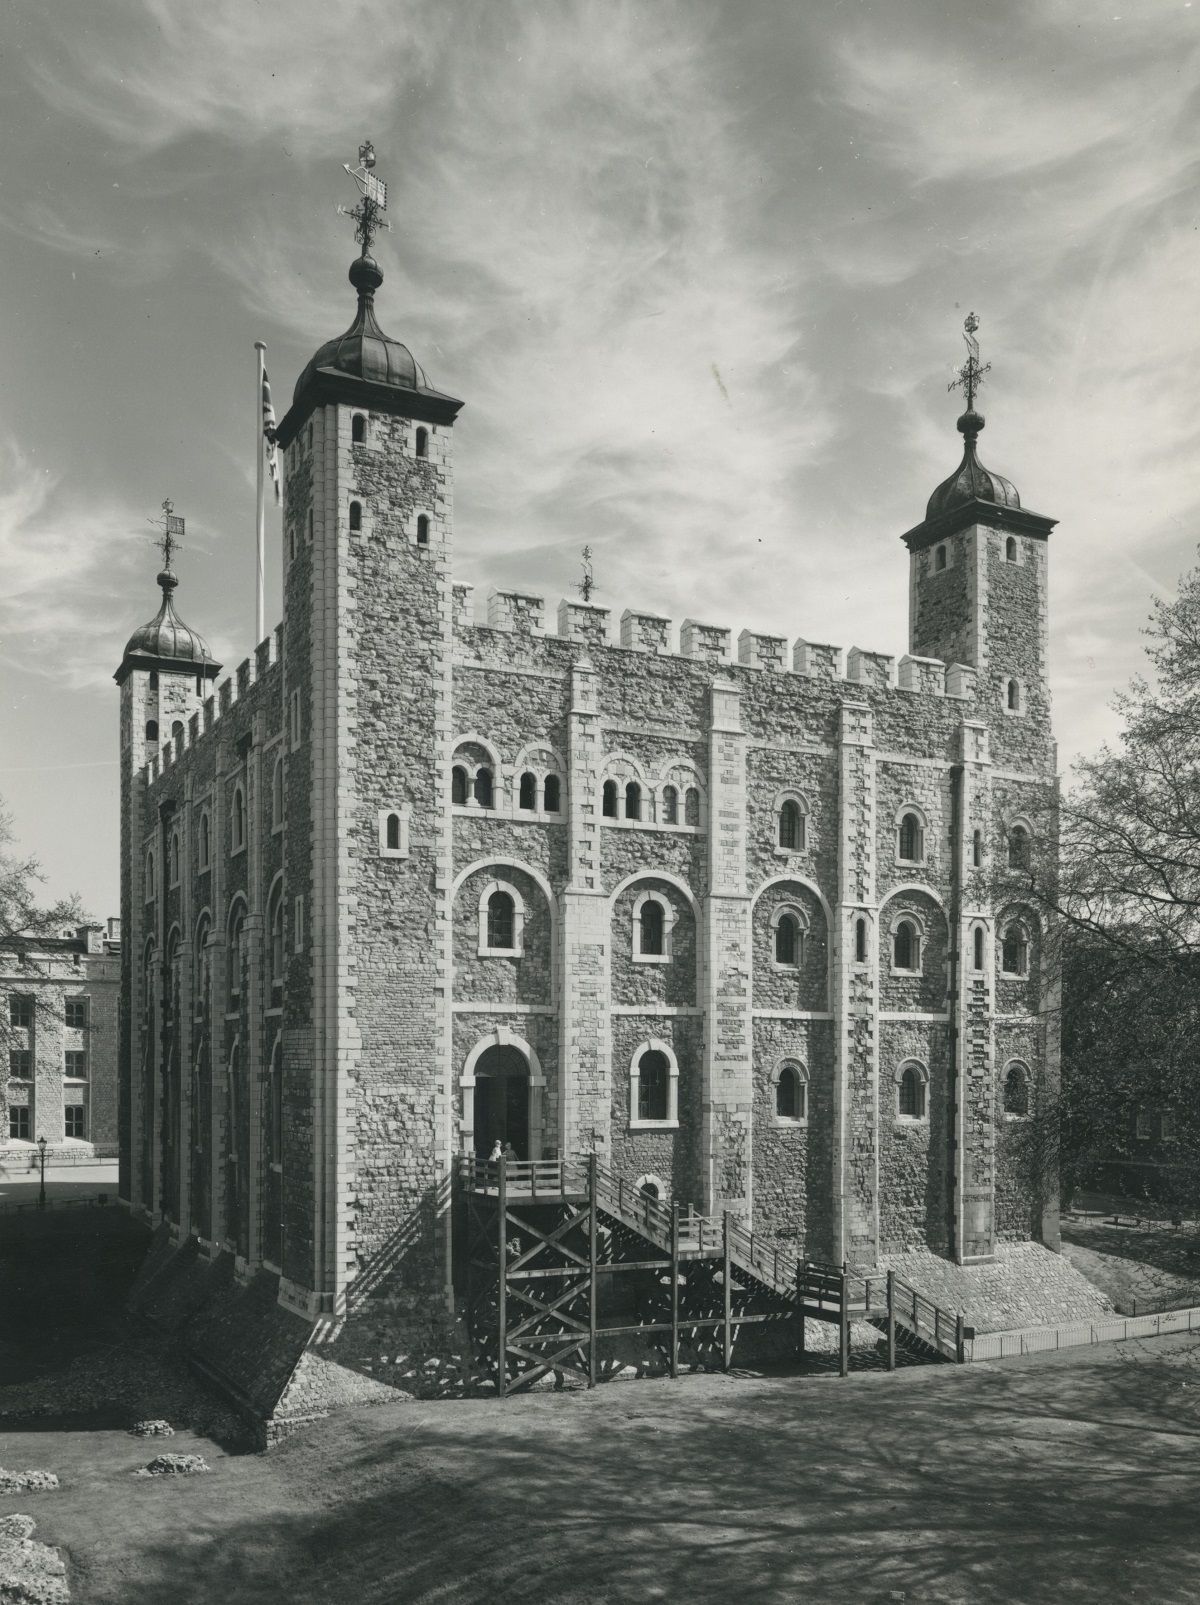 A black and white photograph of the keep